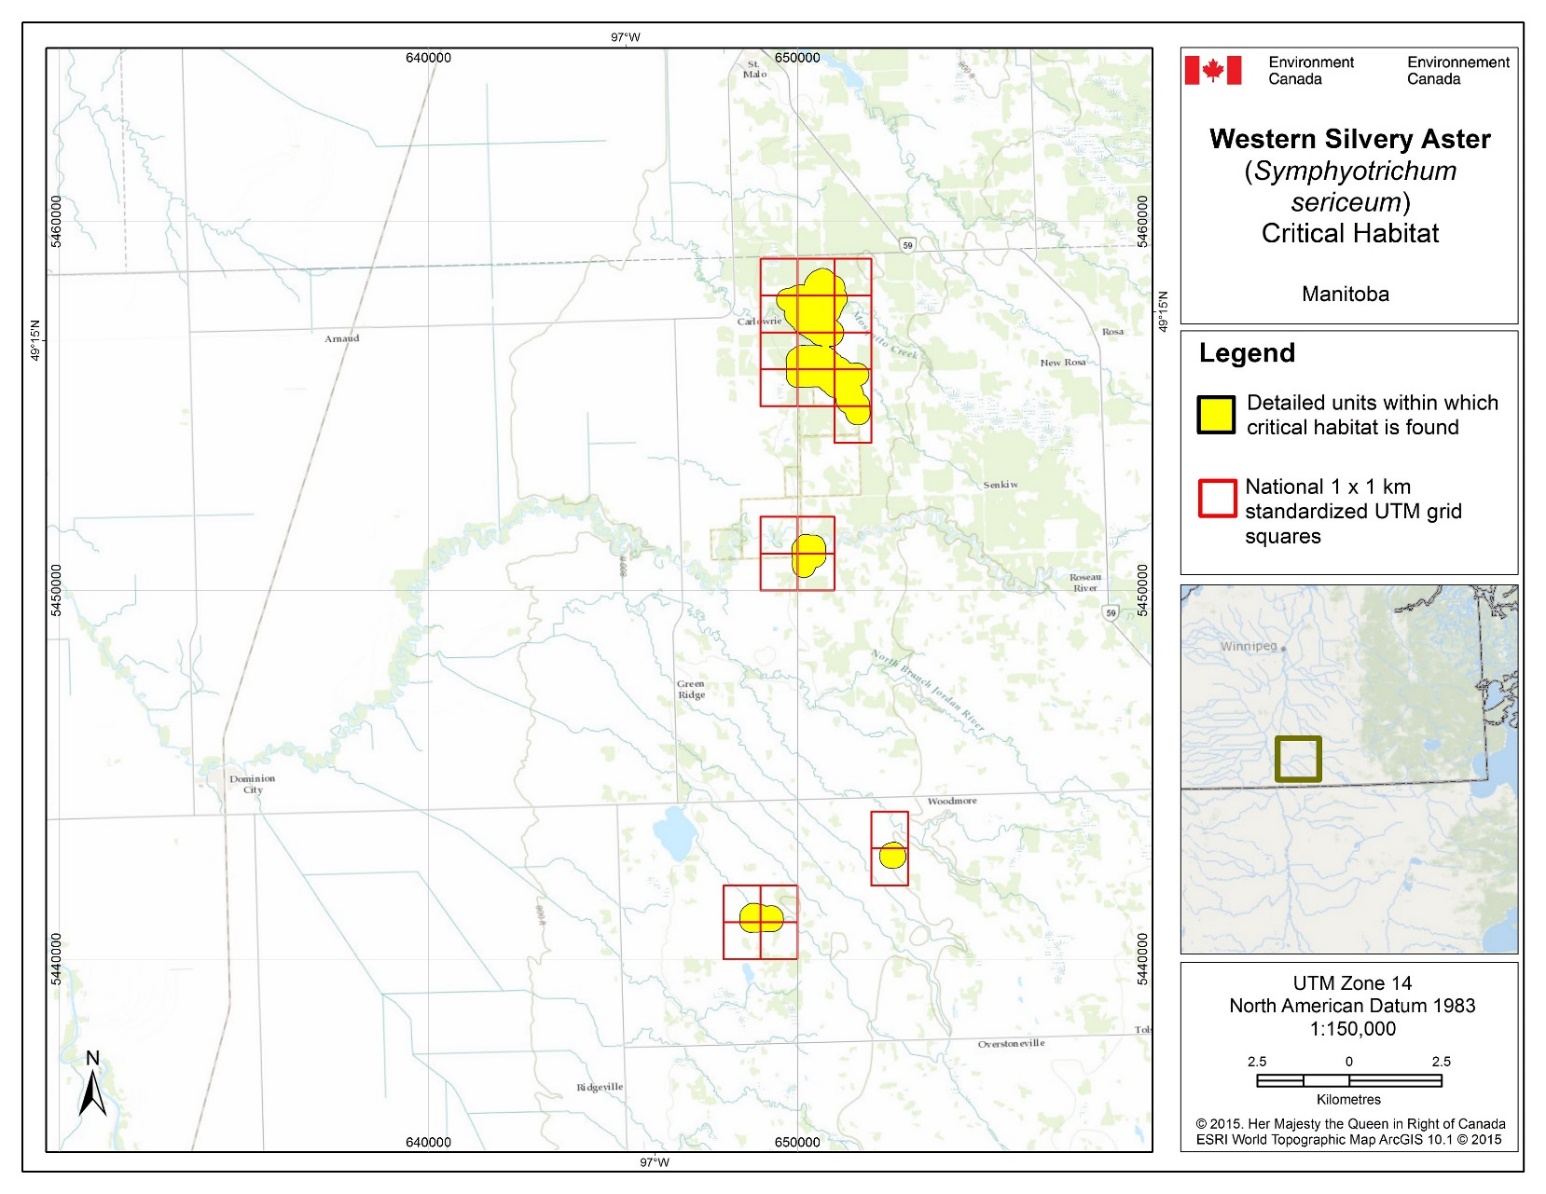 Figure B2: Map of Critical habitat for Western Silvery Aster in Manitoba